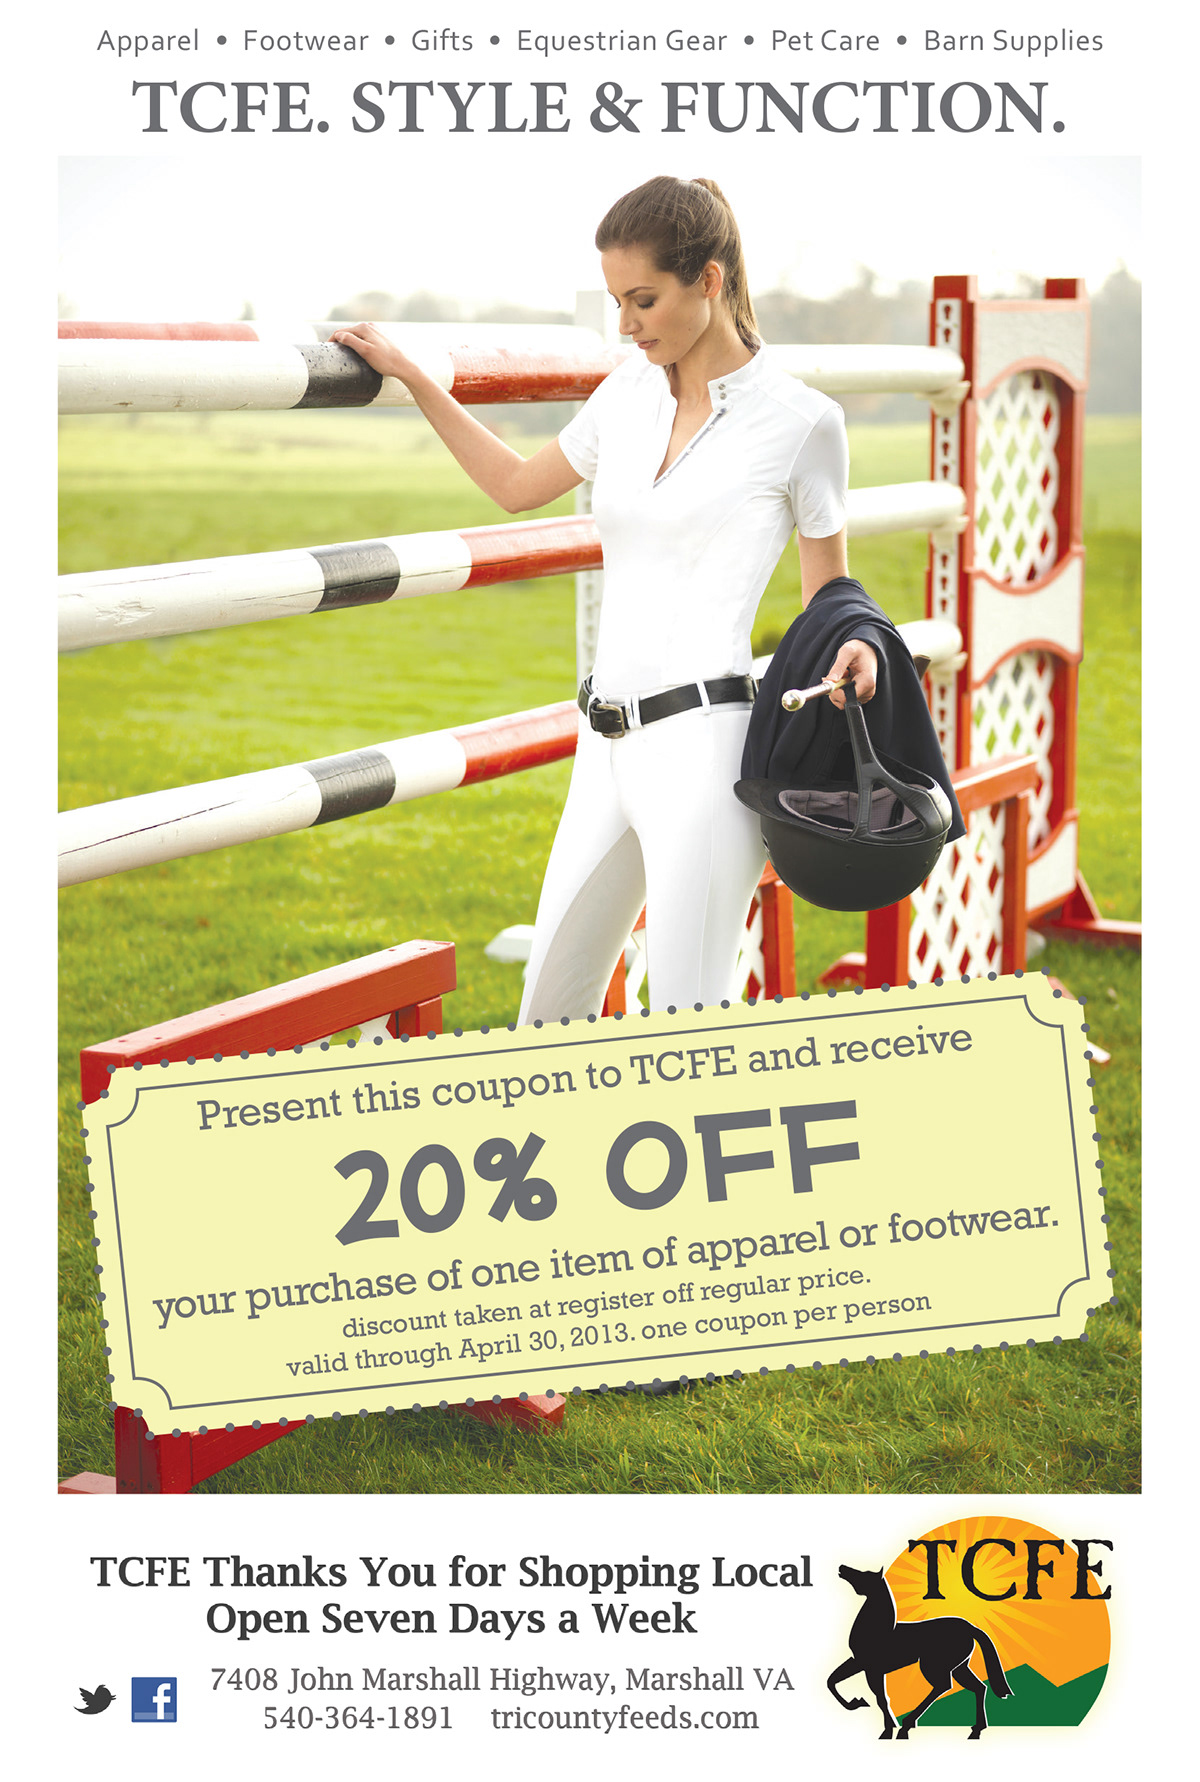 Collateral COUPON handout marketing   equestrian